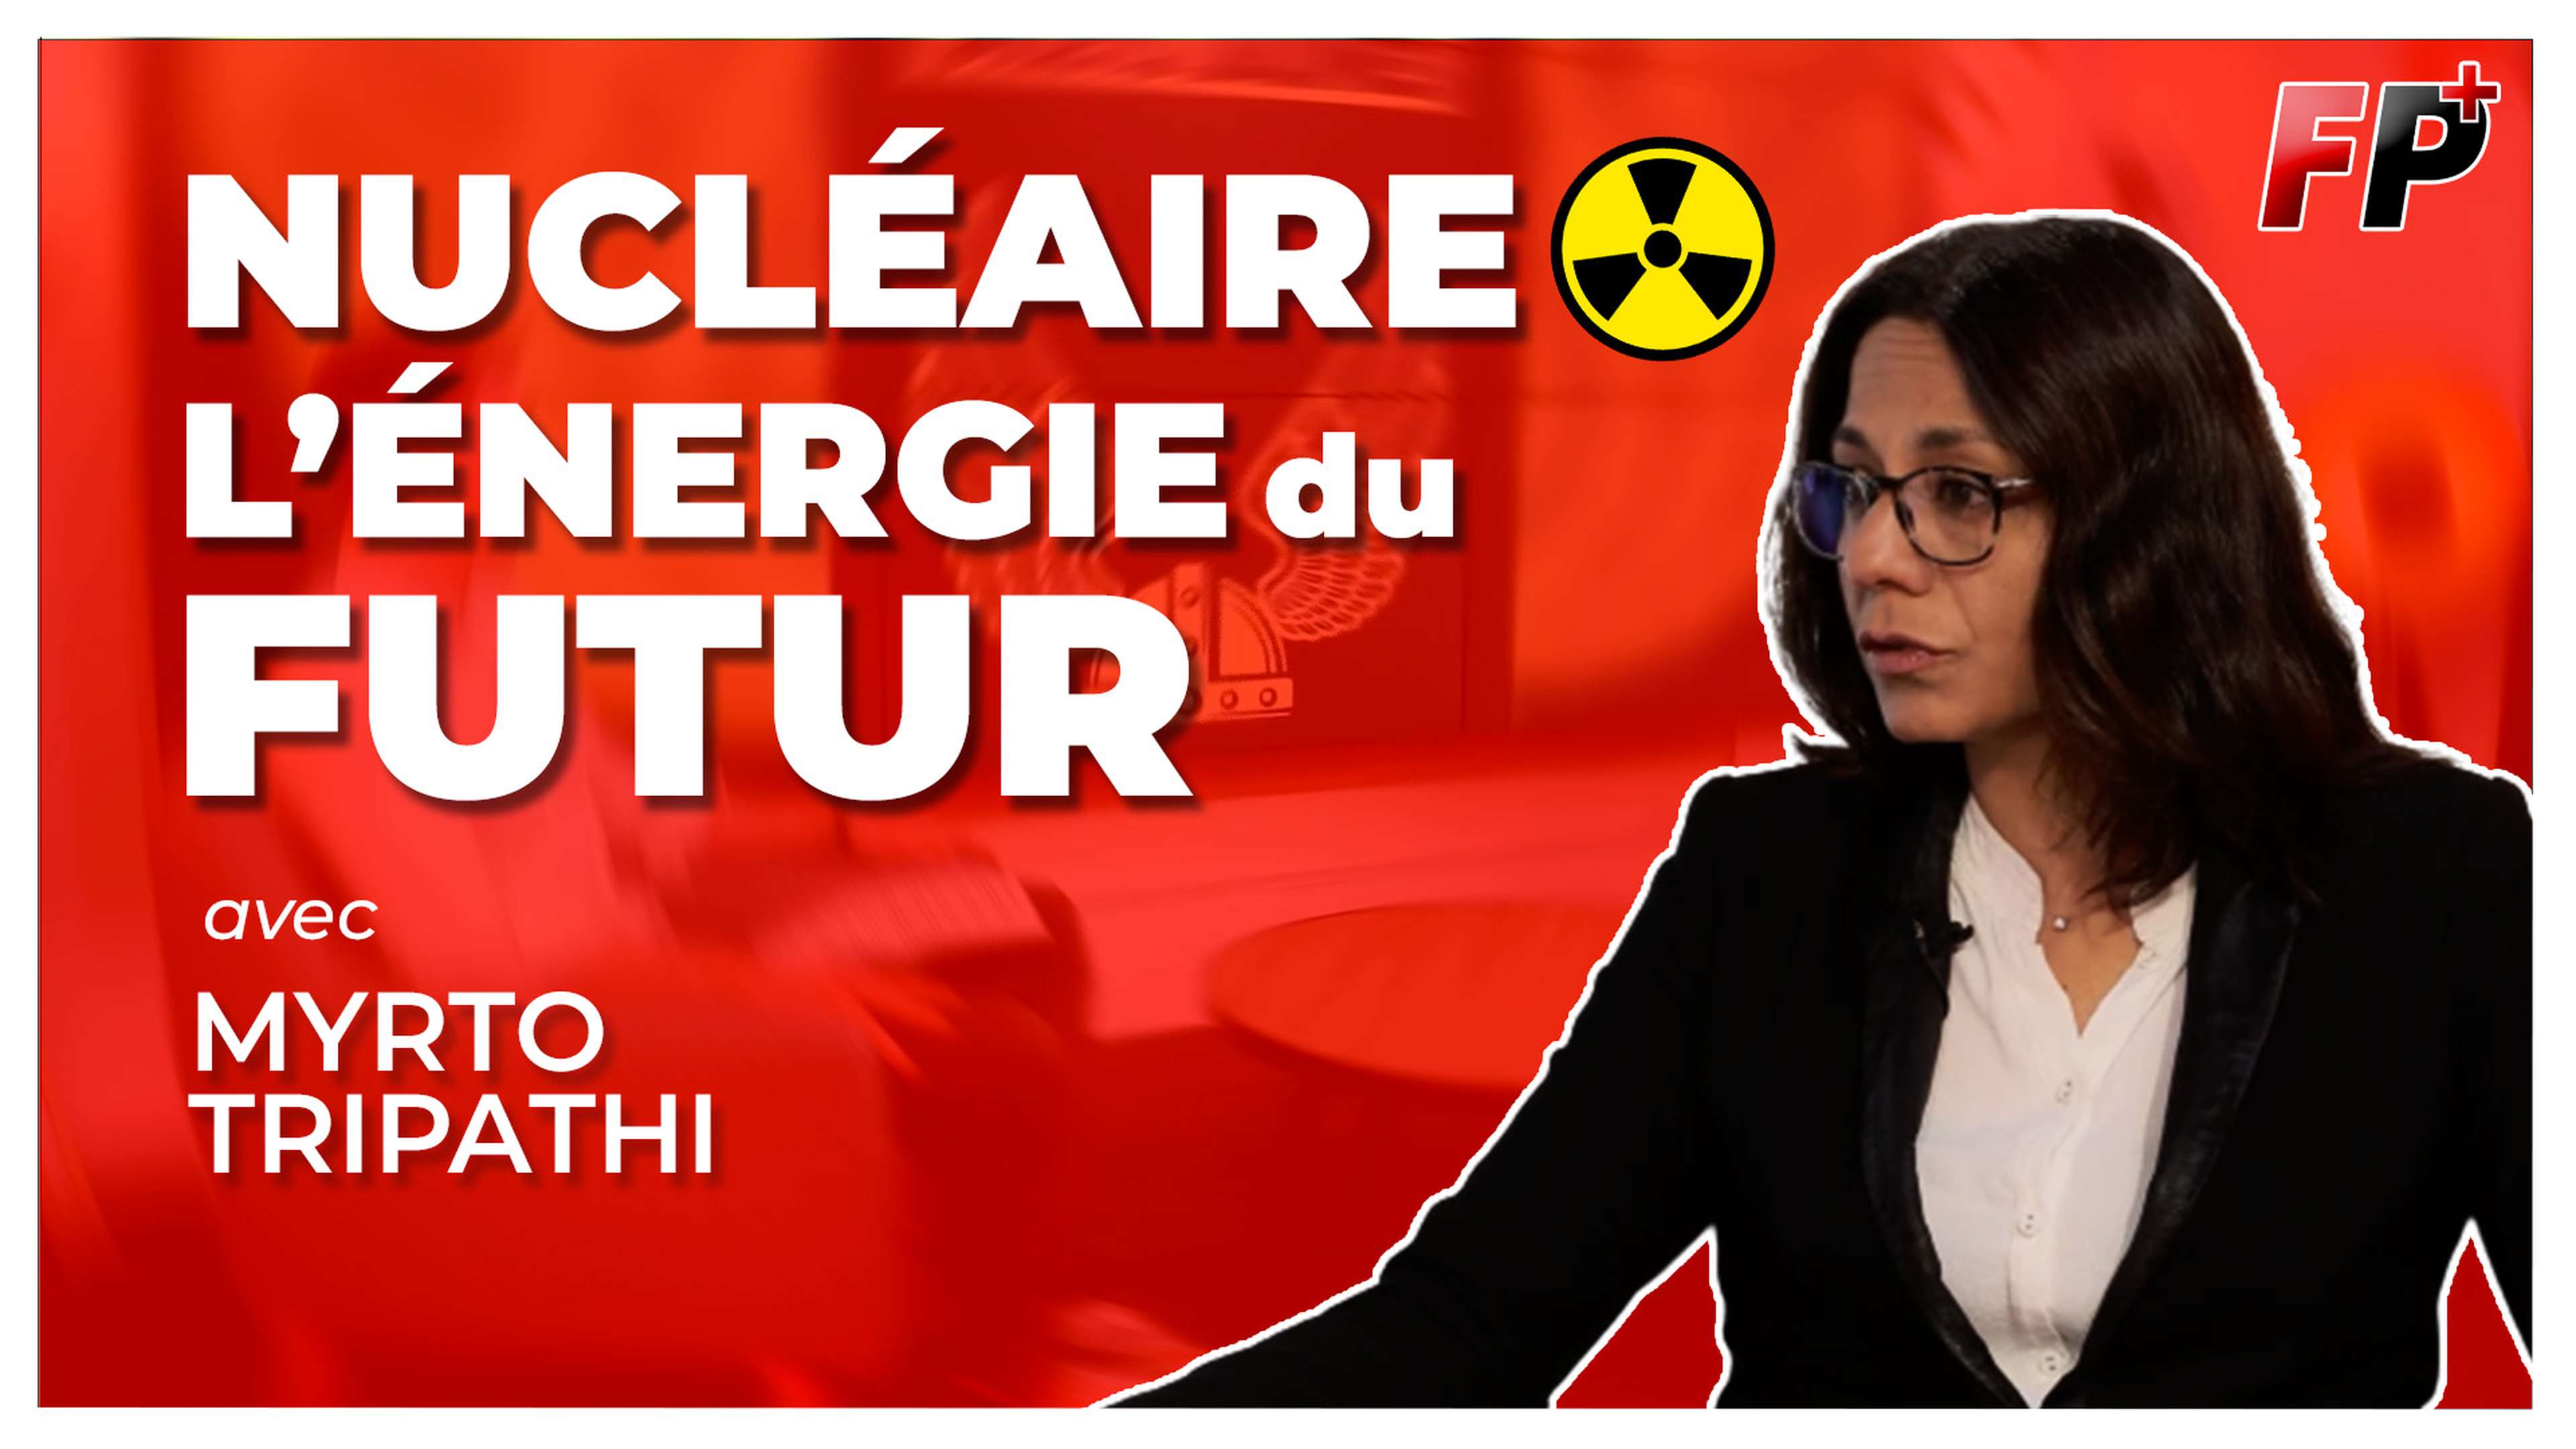 /2023/05/myrto-tripathi-nucleaire-front-populaire